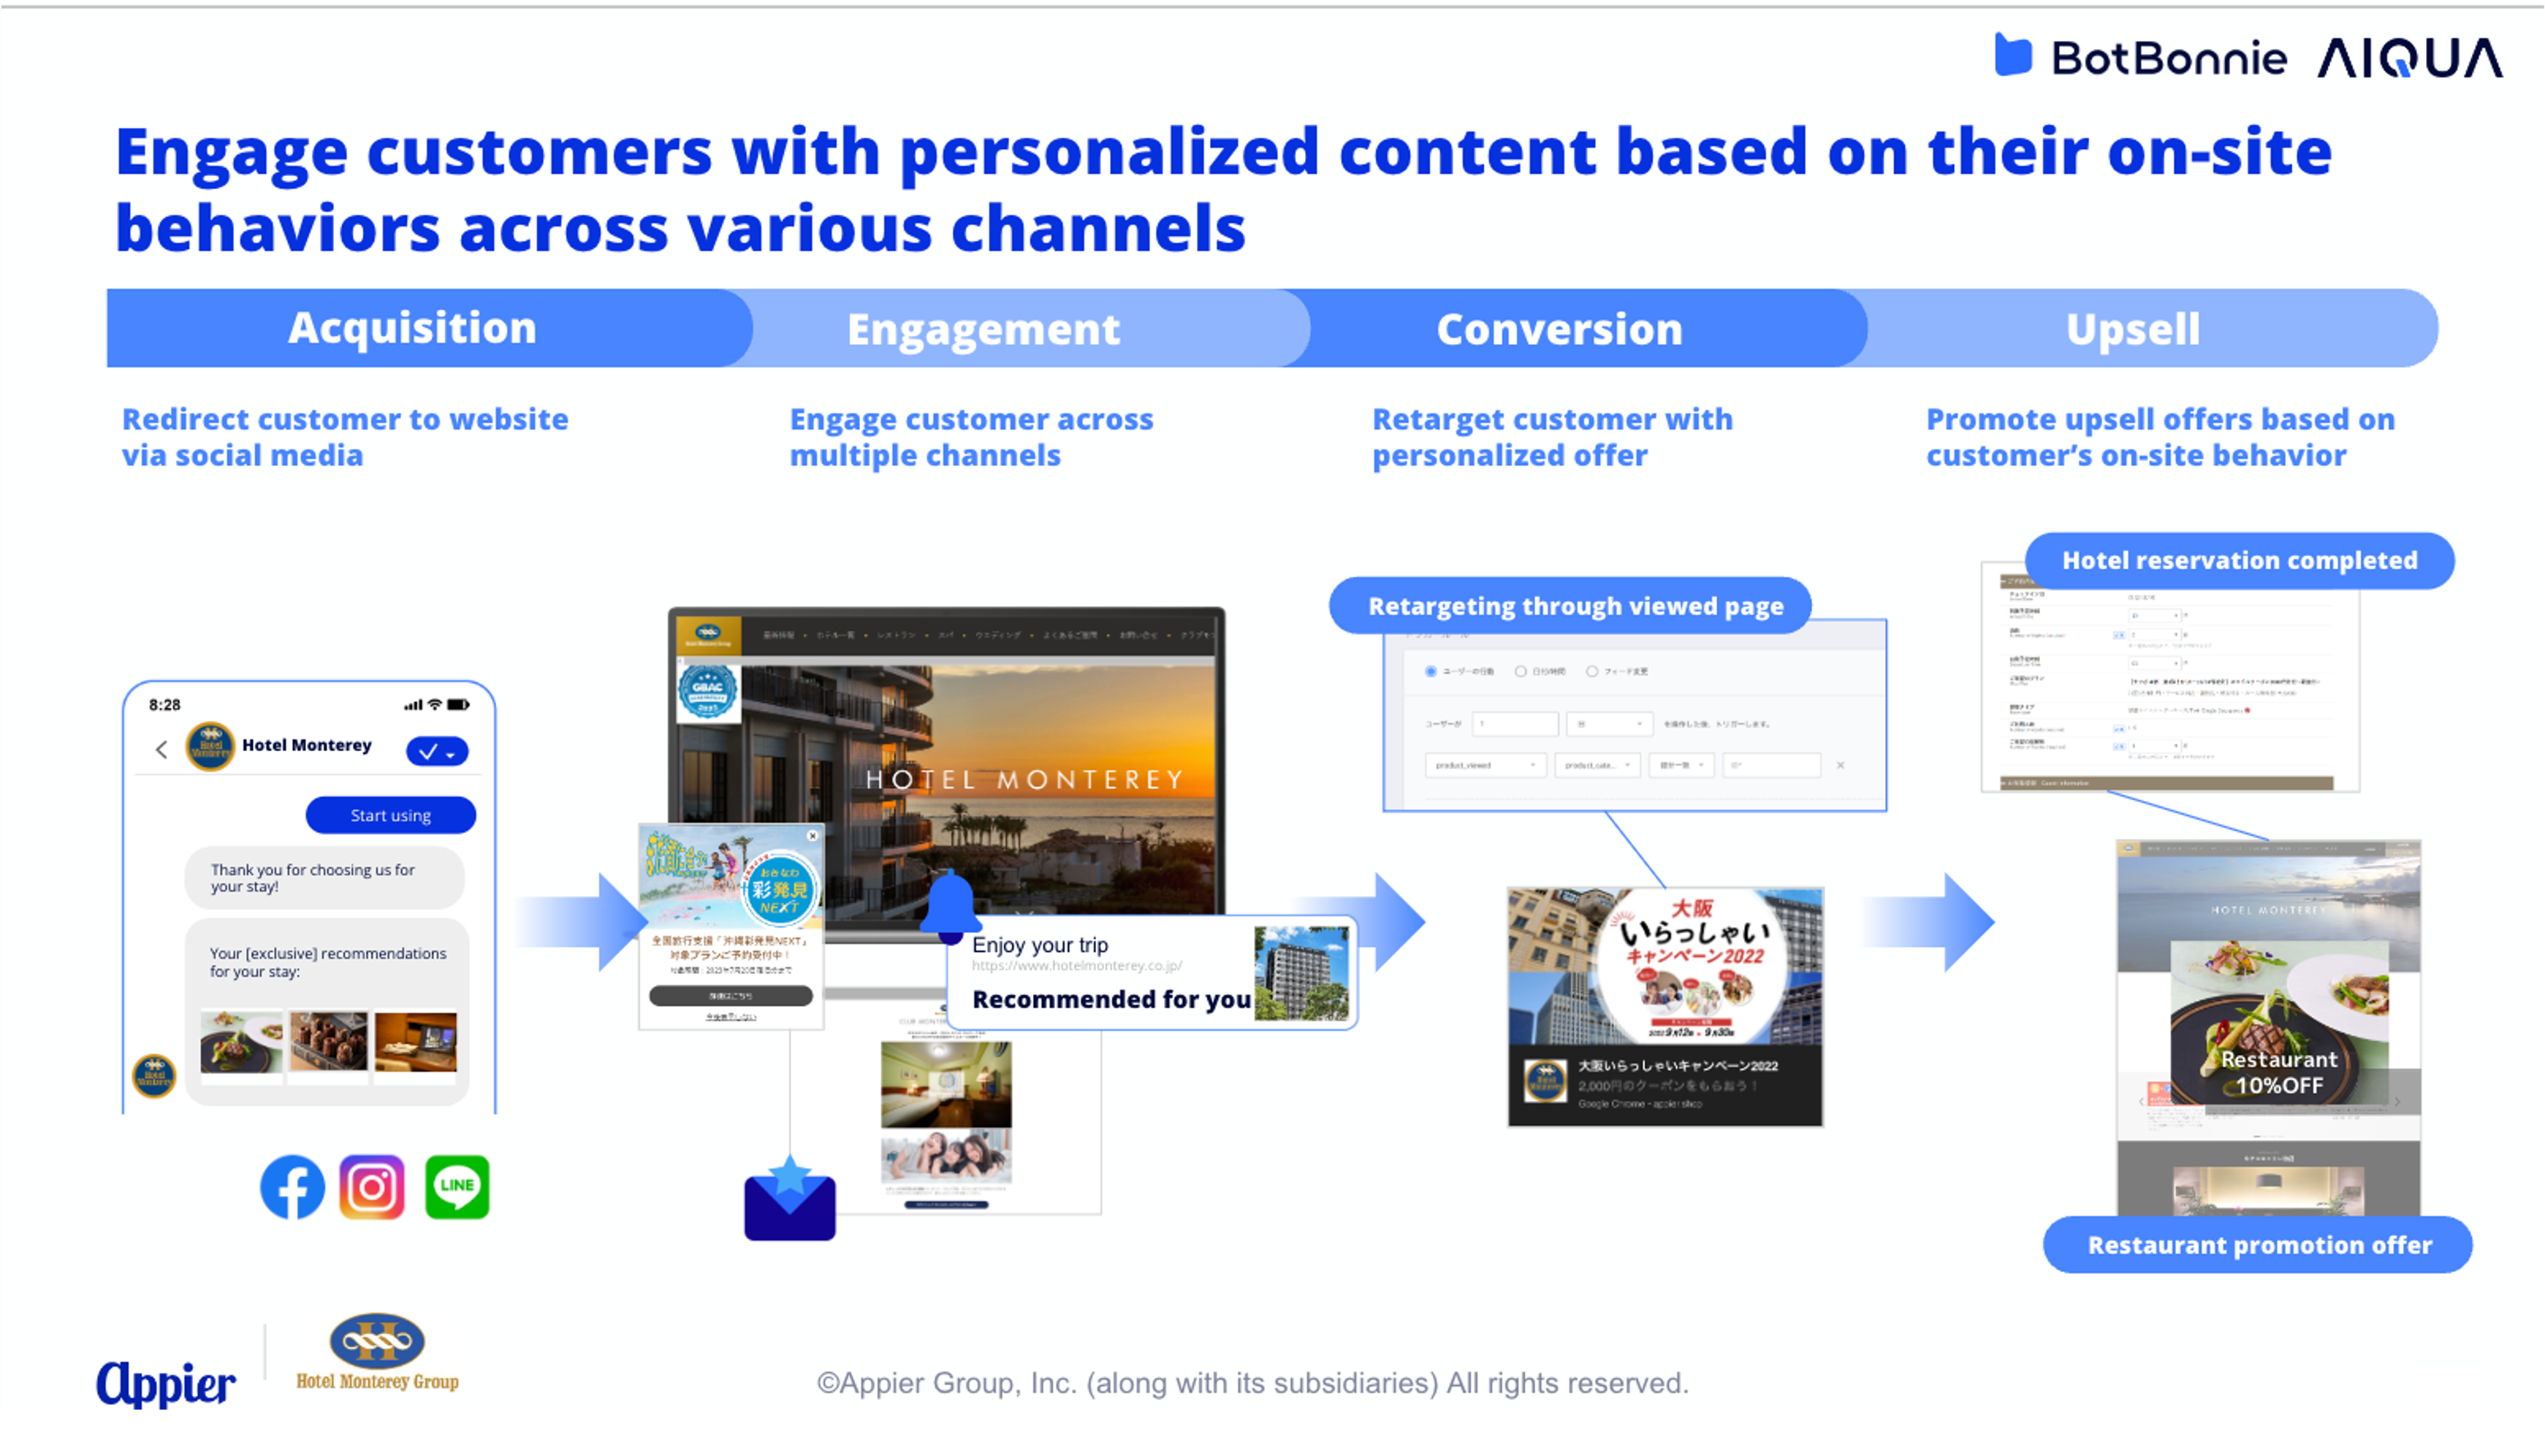 Omni-channel engagement with customers